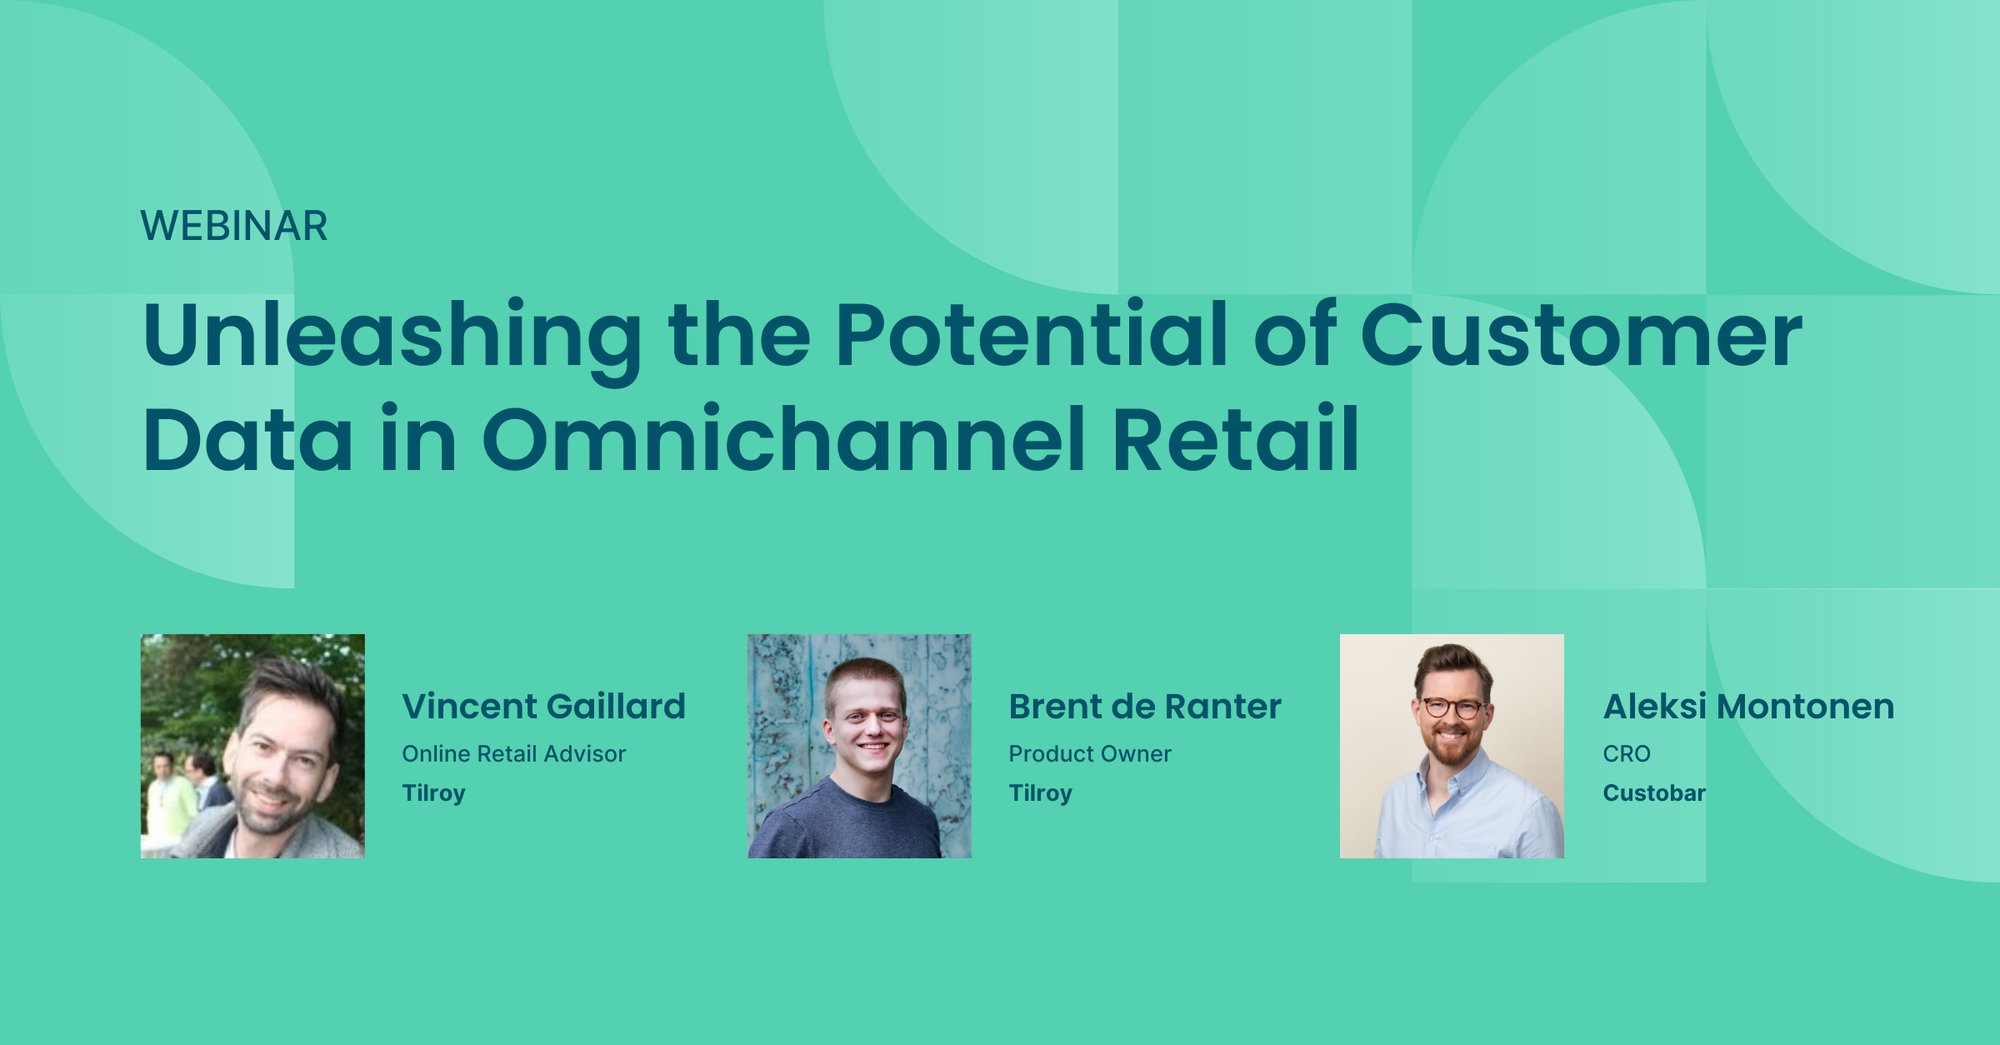 Unleashing the Potential of Customer Data in Omnichannel Retail